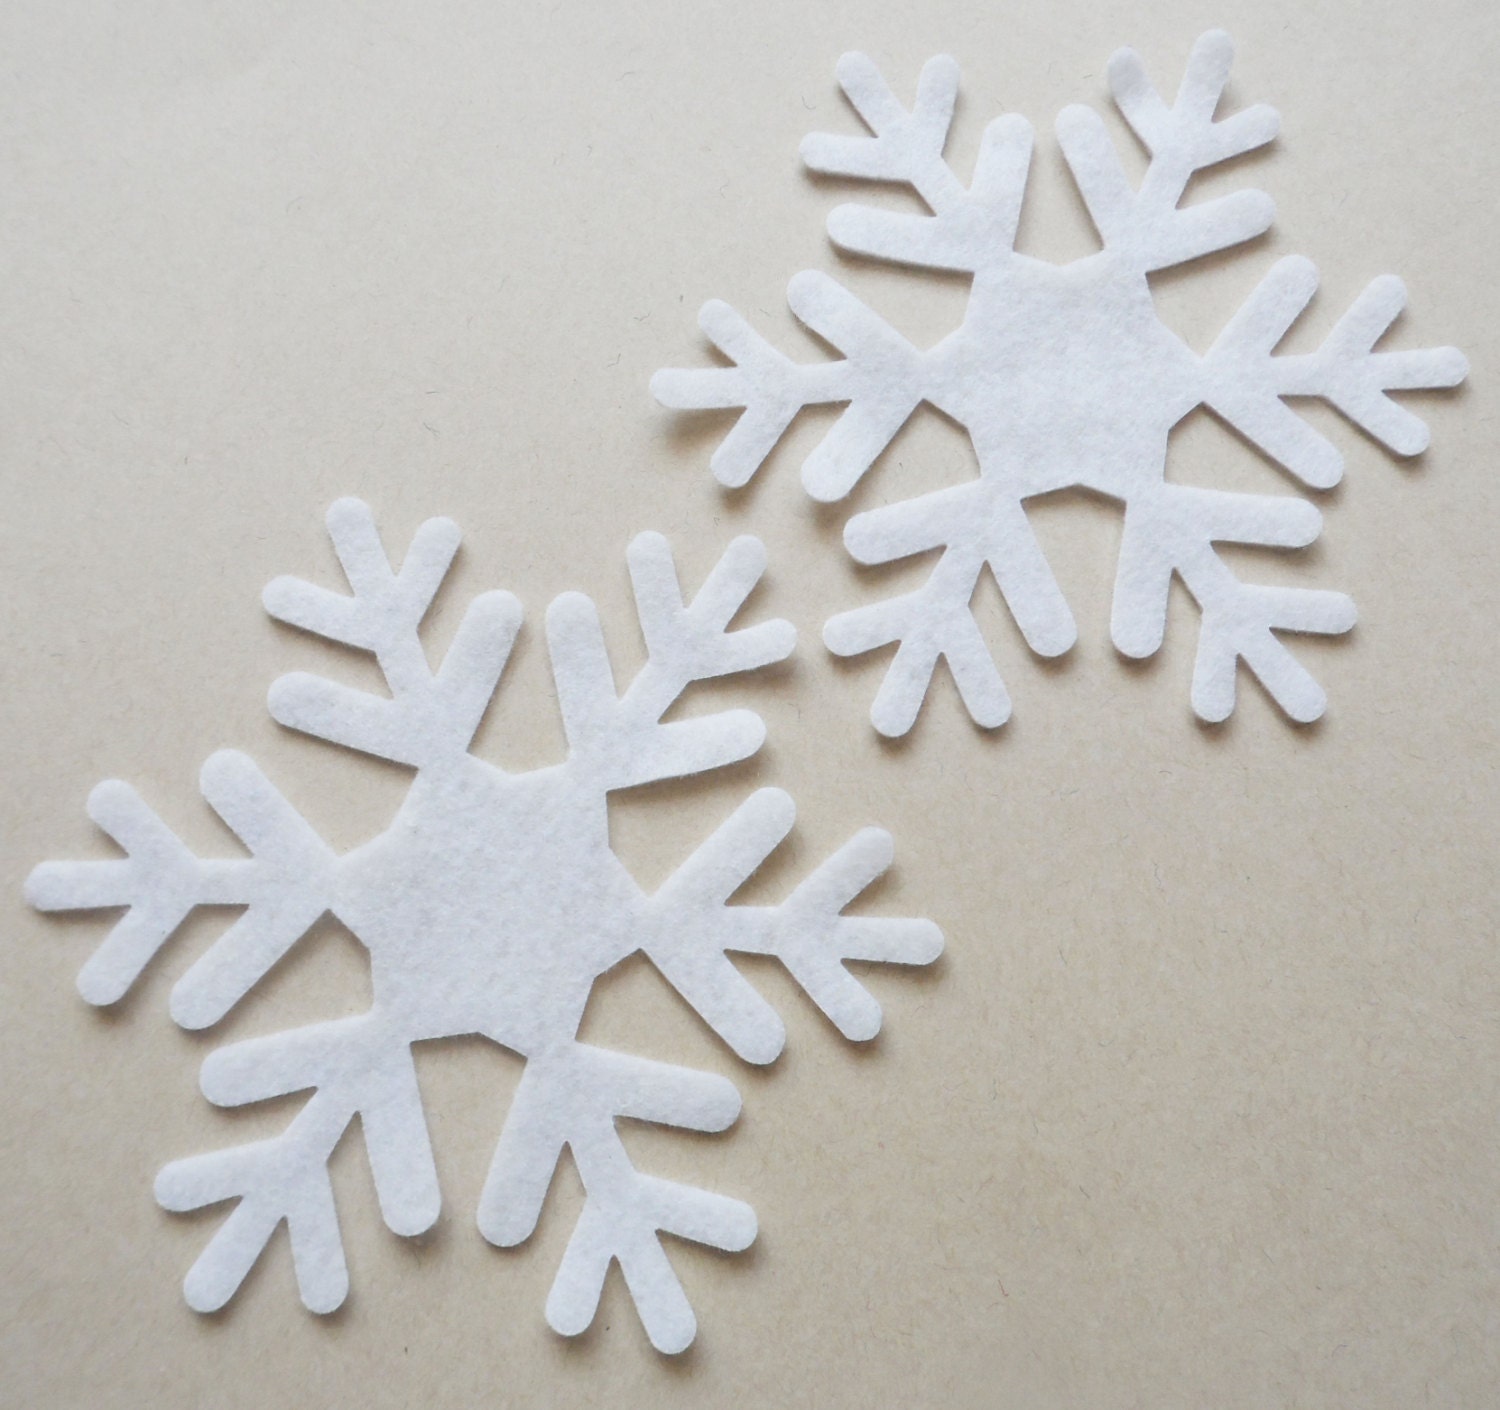 Grey and White Felt Snowflakes Mix, 30 Die Cut Felt Snowflakes, Felt  Snowflake Shapes, Small Snowflake Pack, Felt Embellishments Craft Pack 